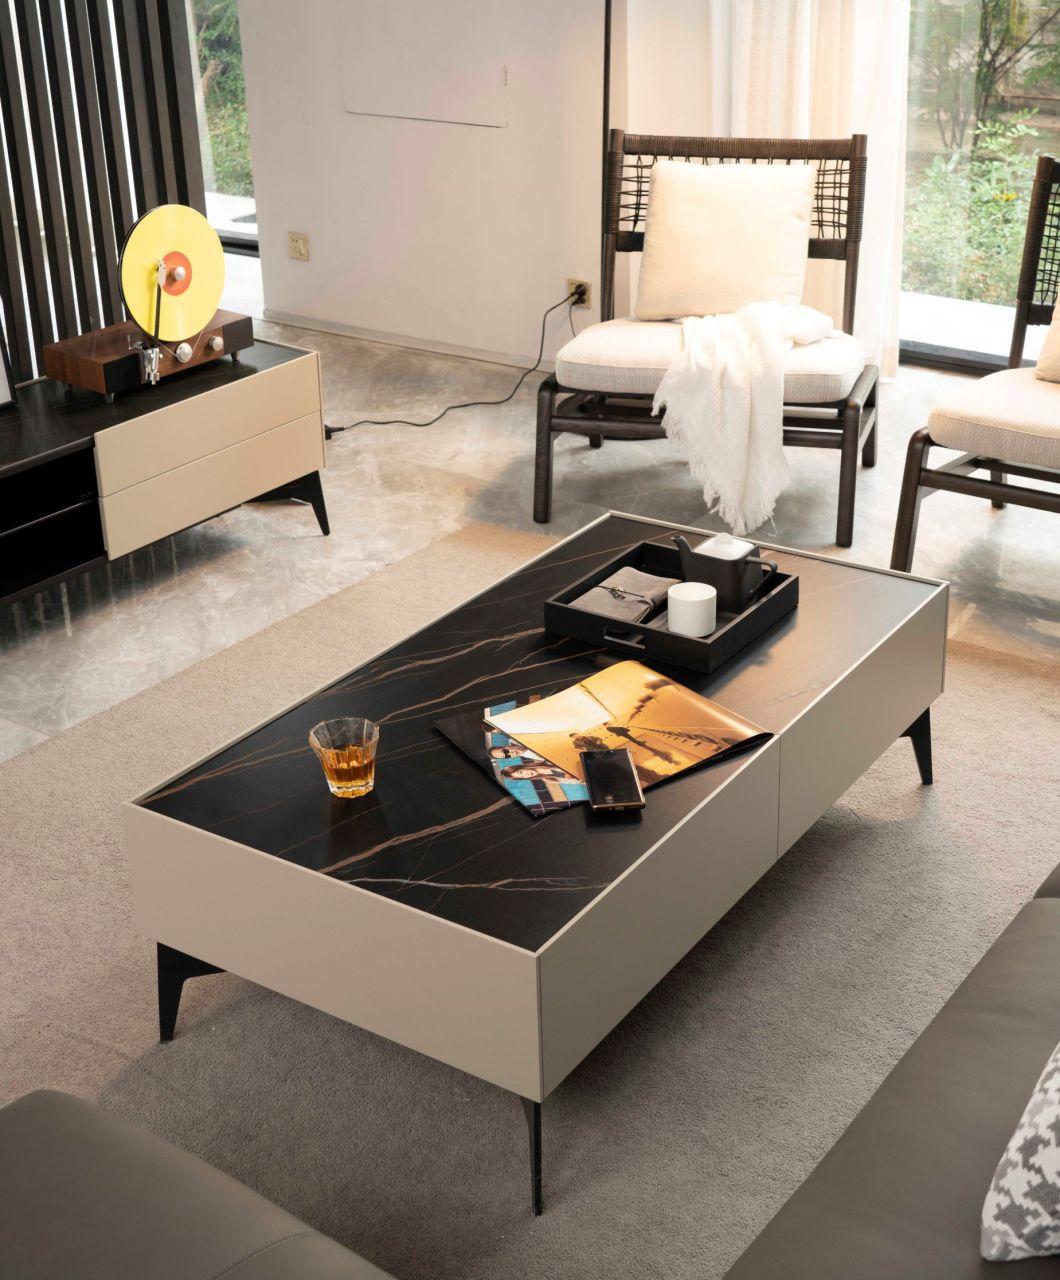 FC772 Wooden Coffee Table, Latest Design Wooden Coffee Table, Italian Design Living Room Furniture in Home and Hotel Furniture Customized